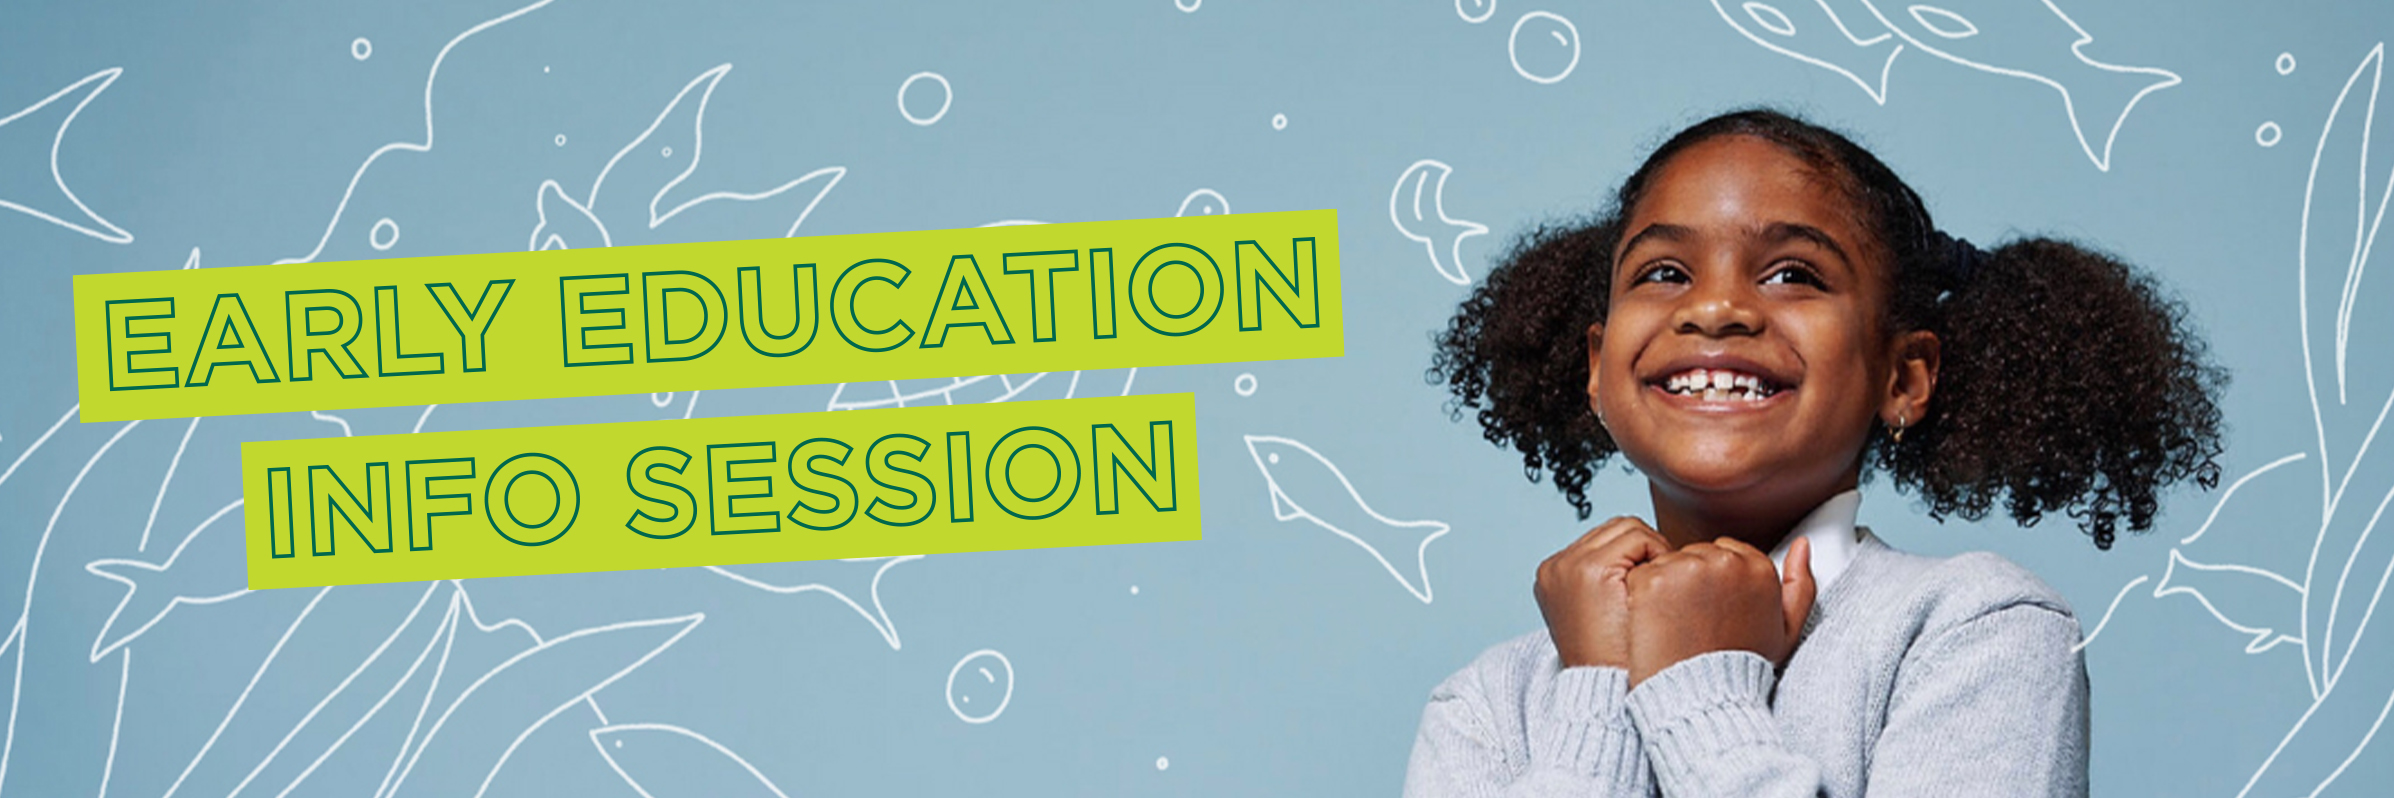 Early Education Info Session